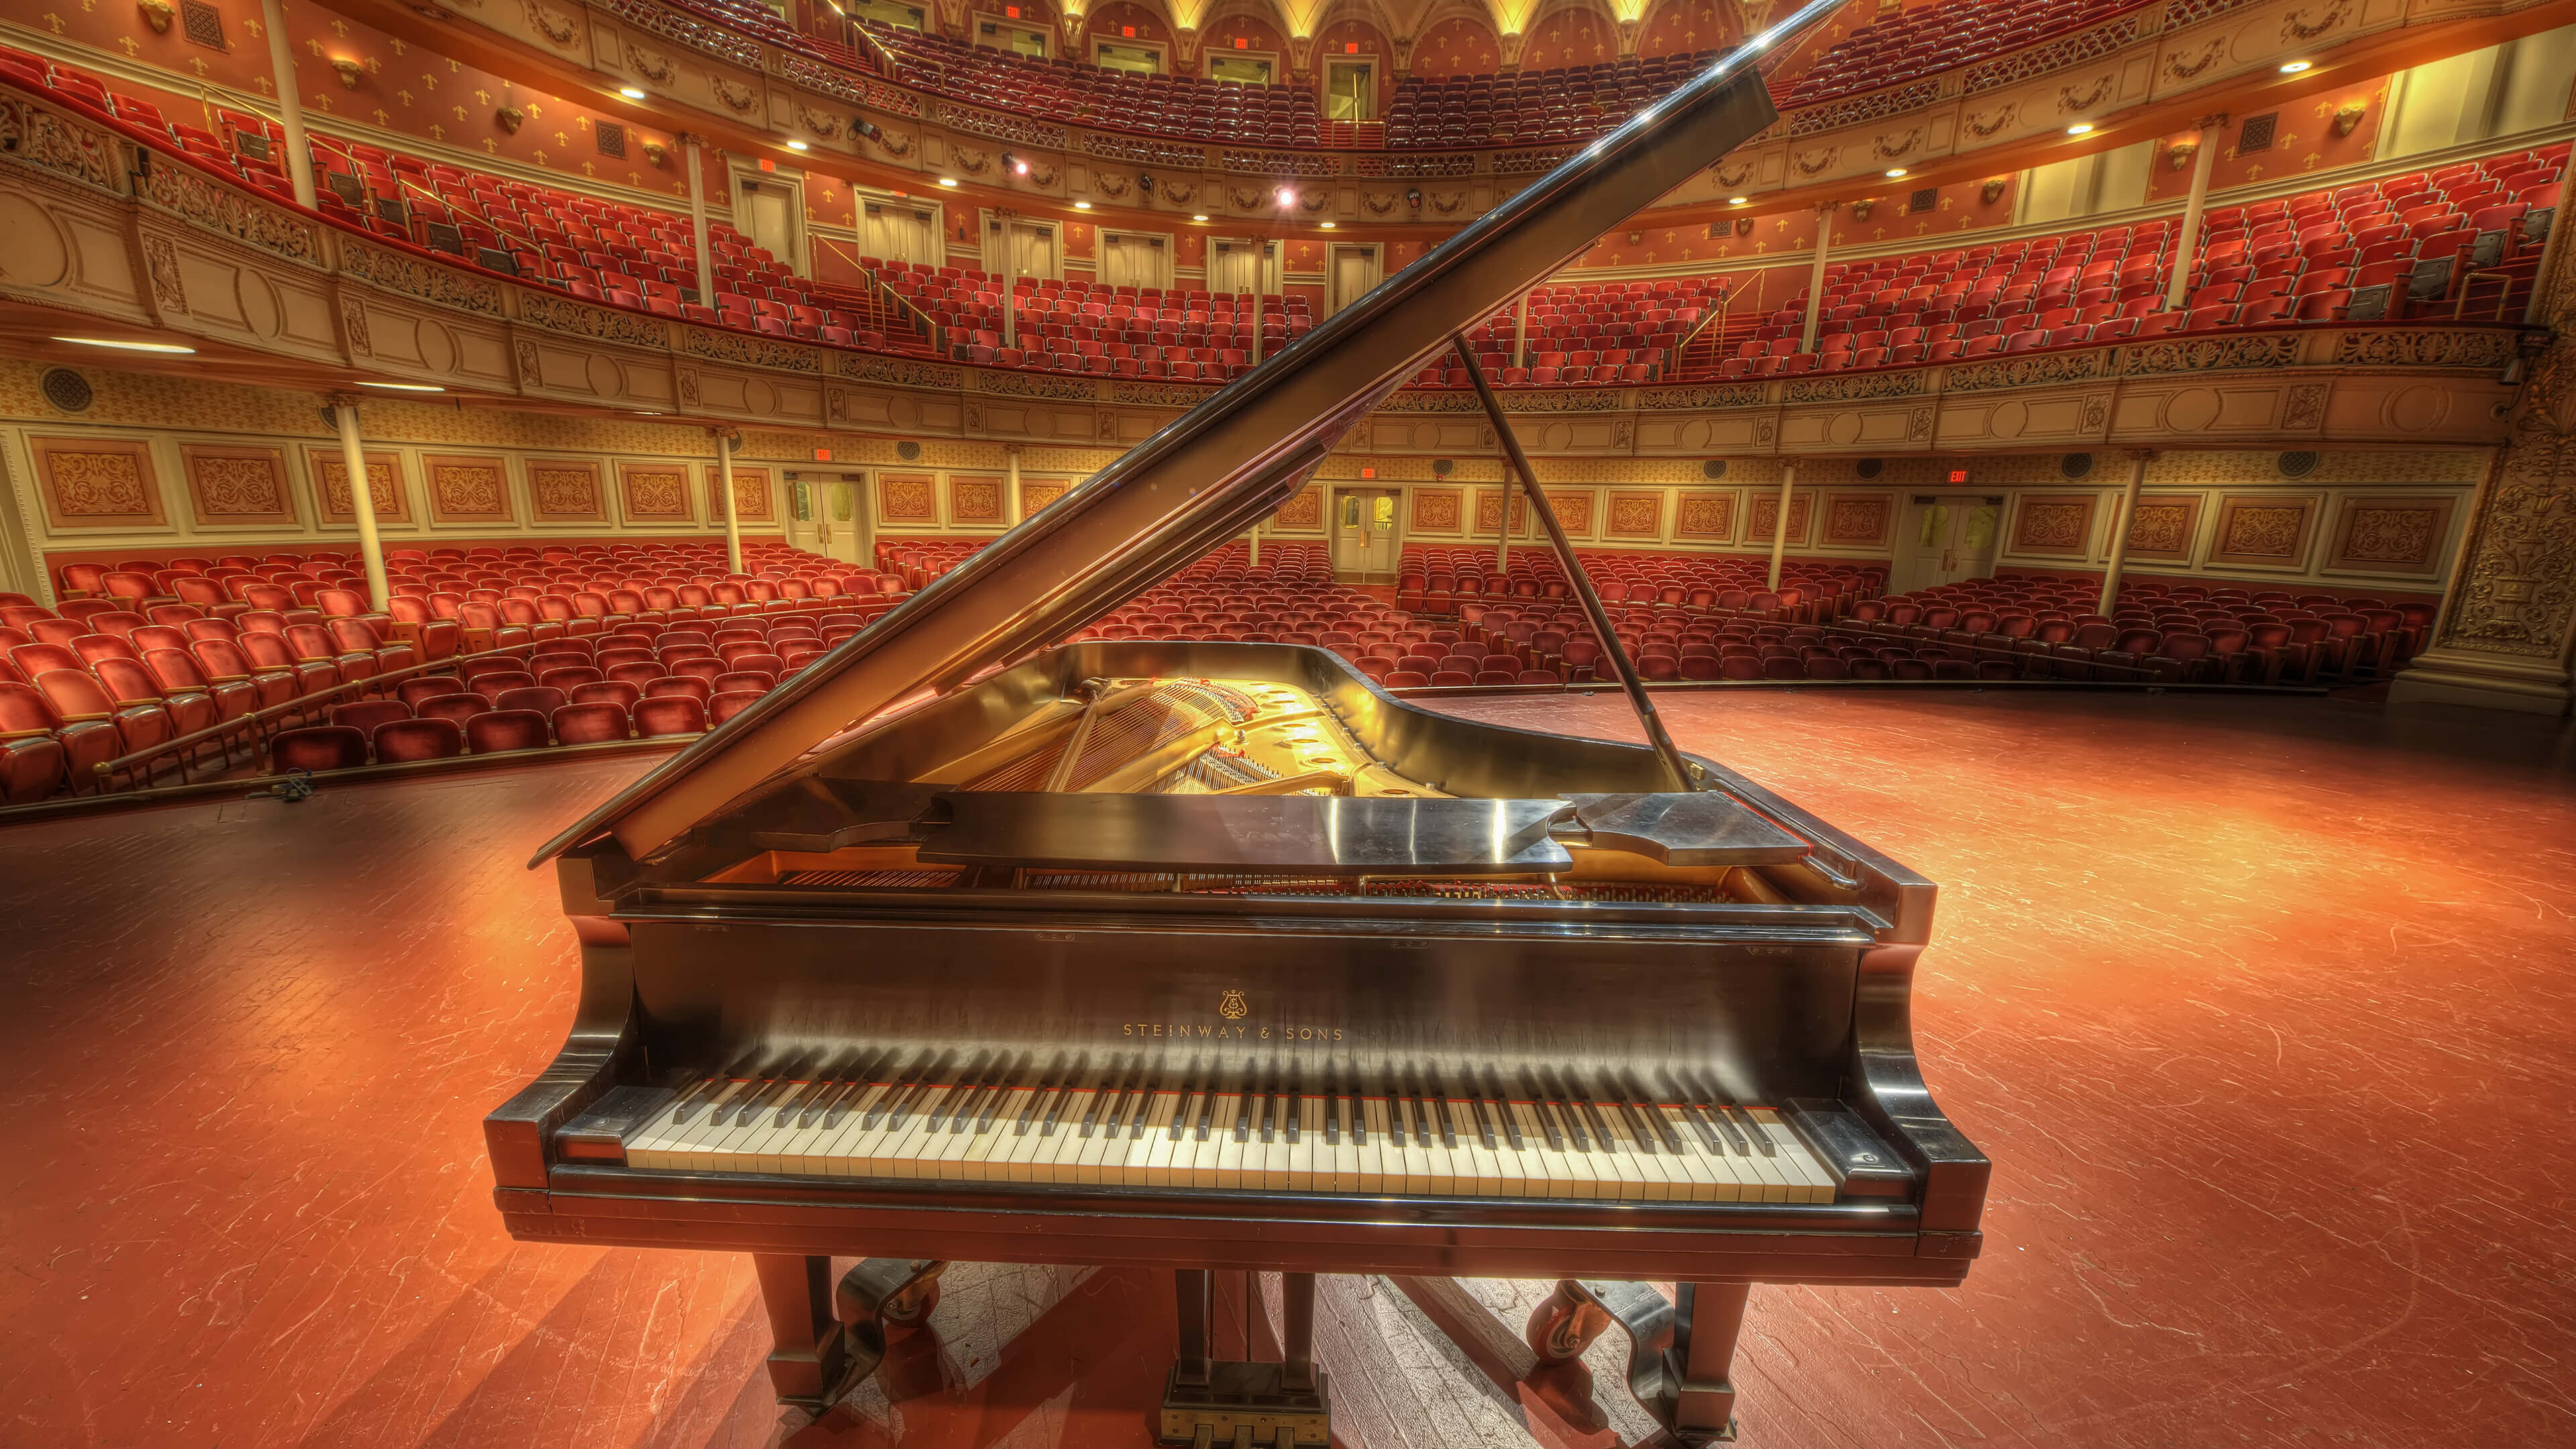 Steinway Sons Piano At Carnegie Music Hall Pittsburgh 4k Wallpaper